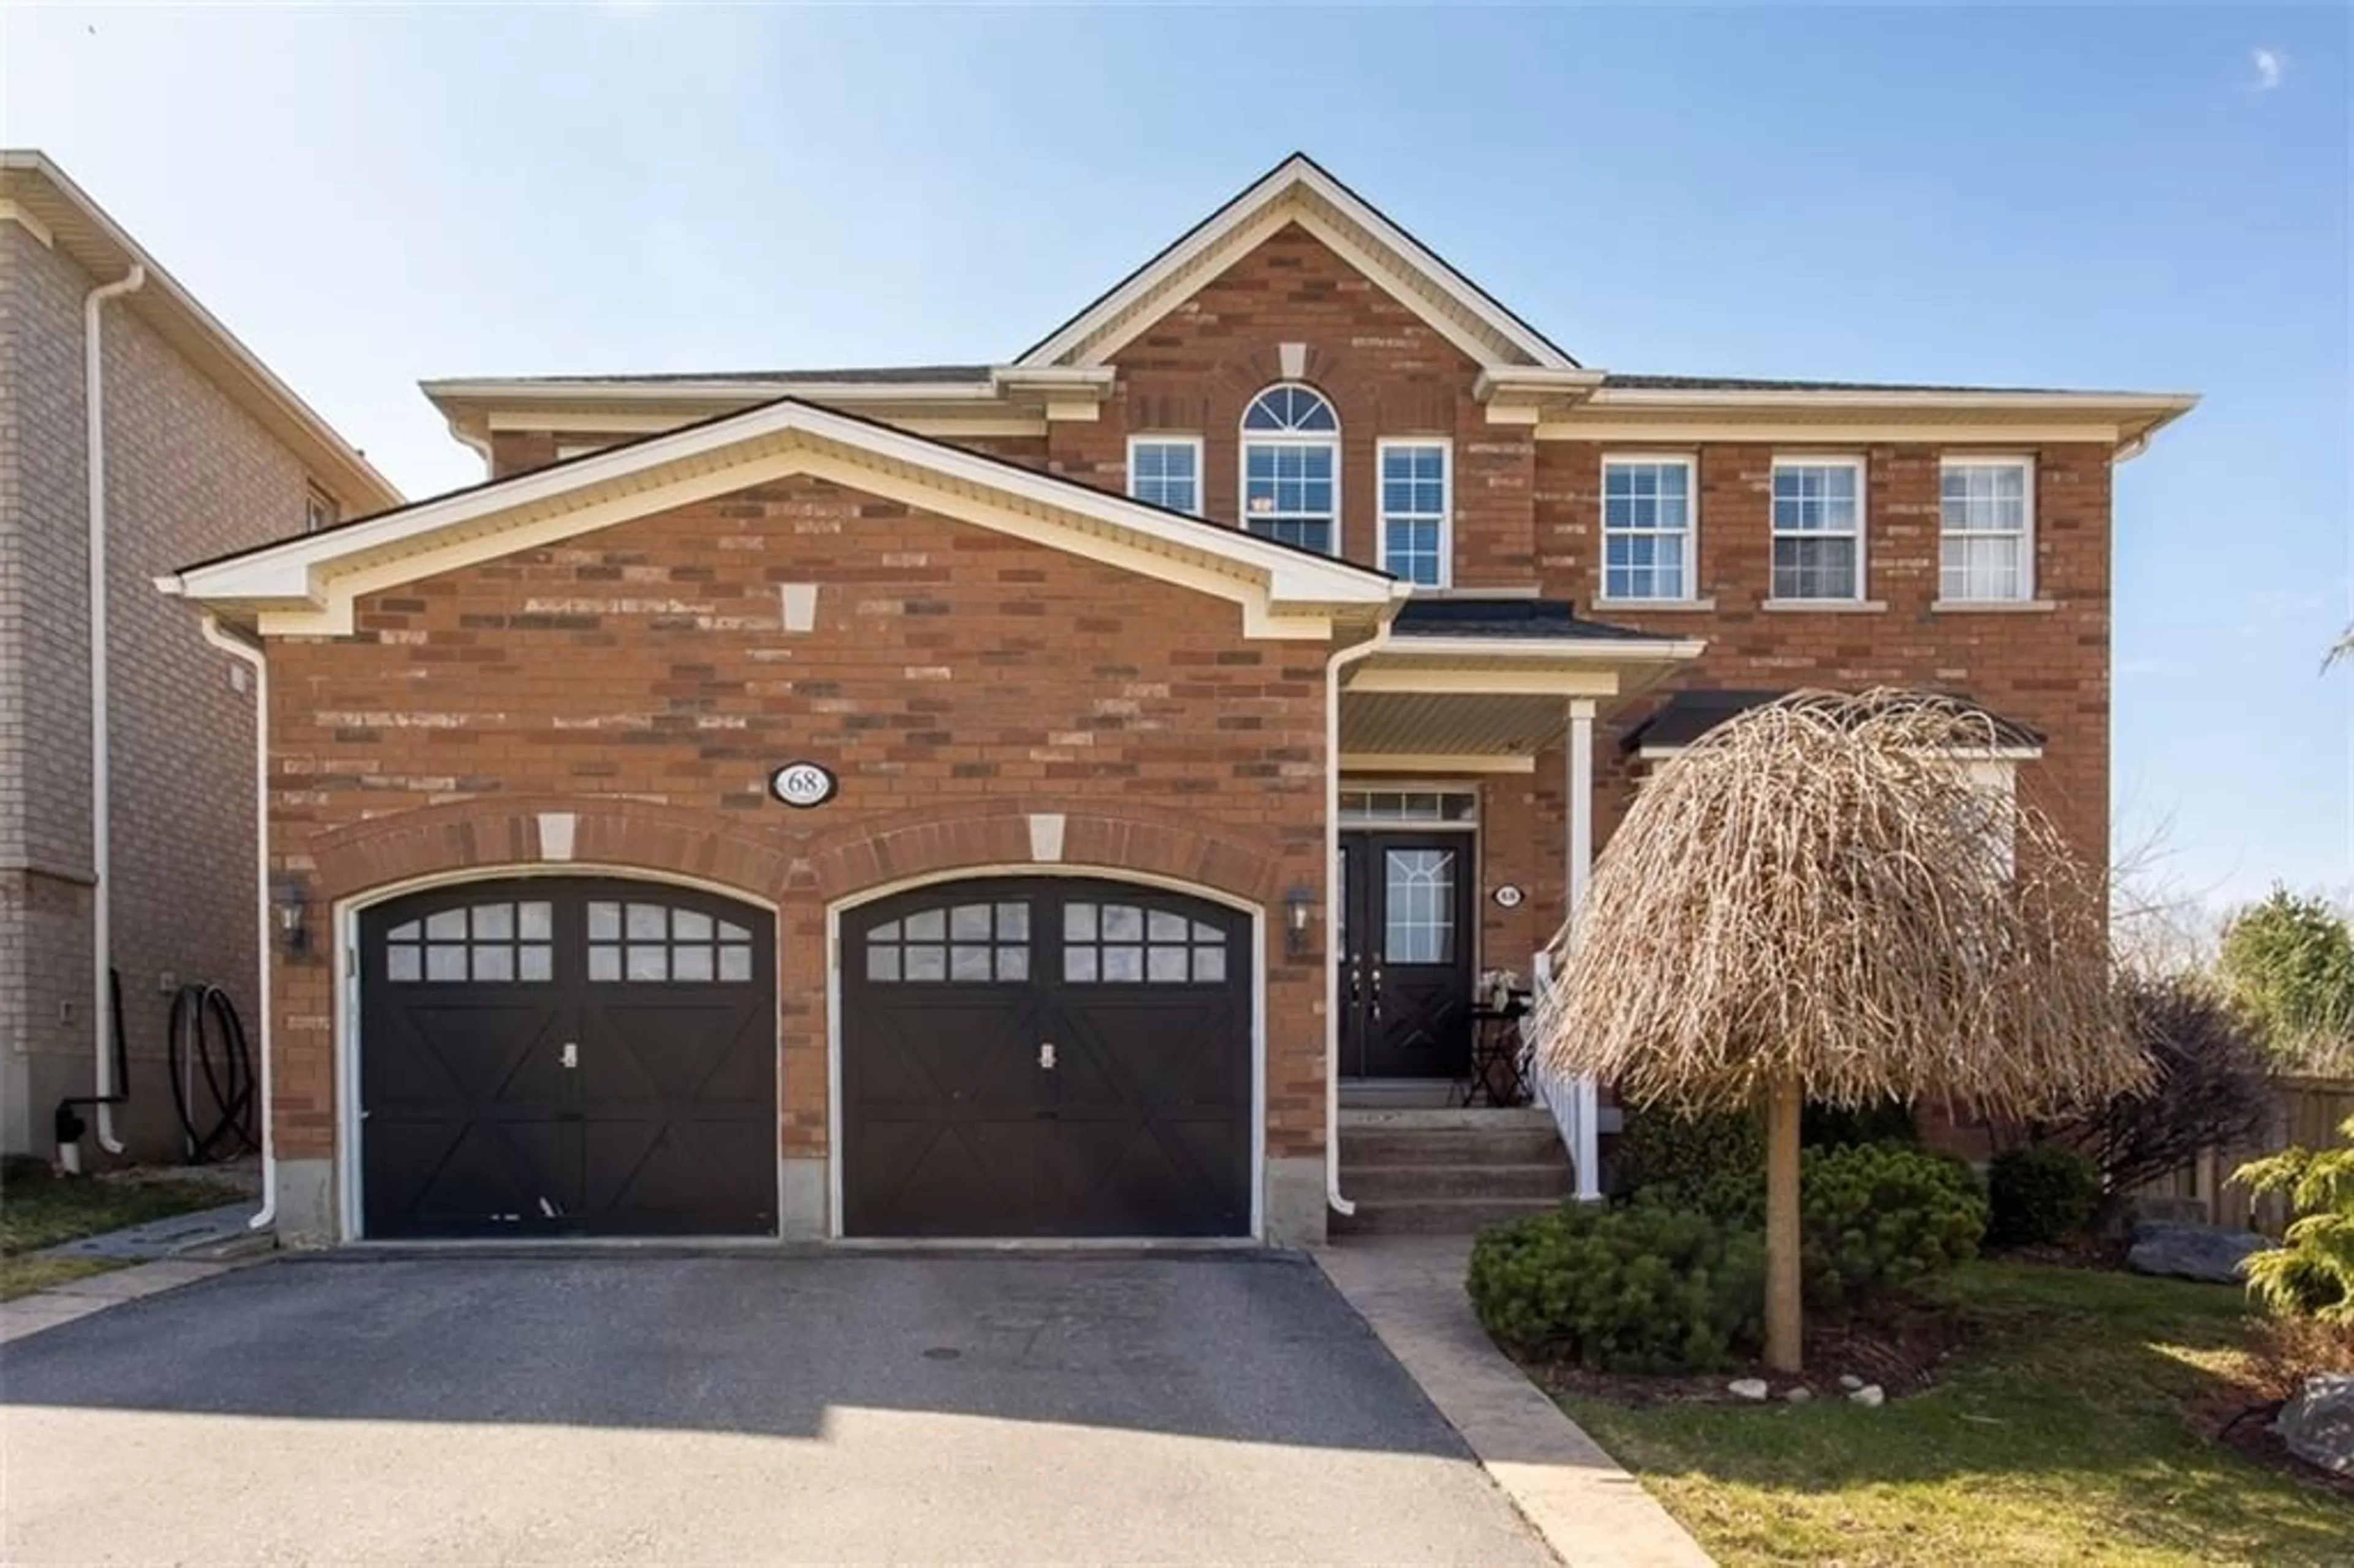 Home with brick exterior material for 68 SWIFT Cres, Cambridge Ontario N1P 1J9